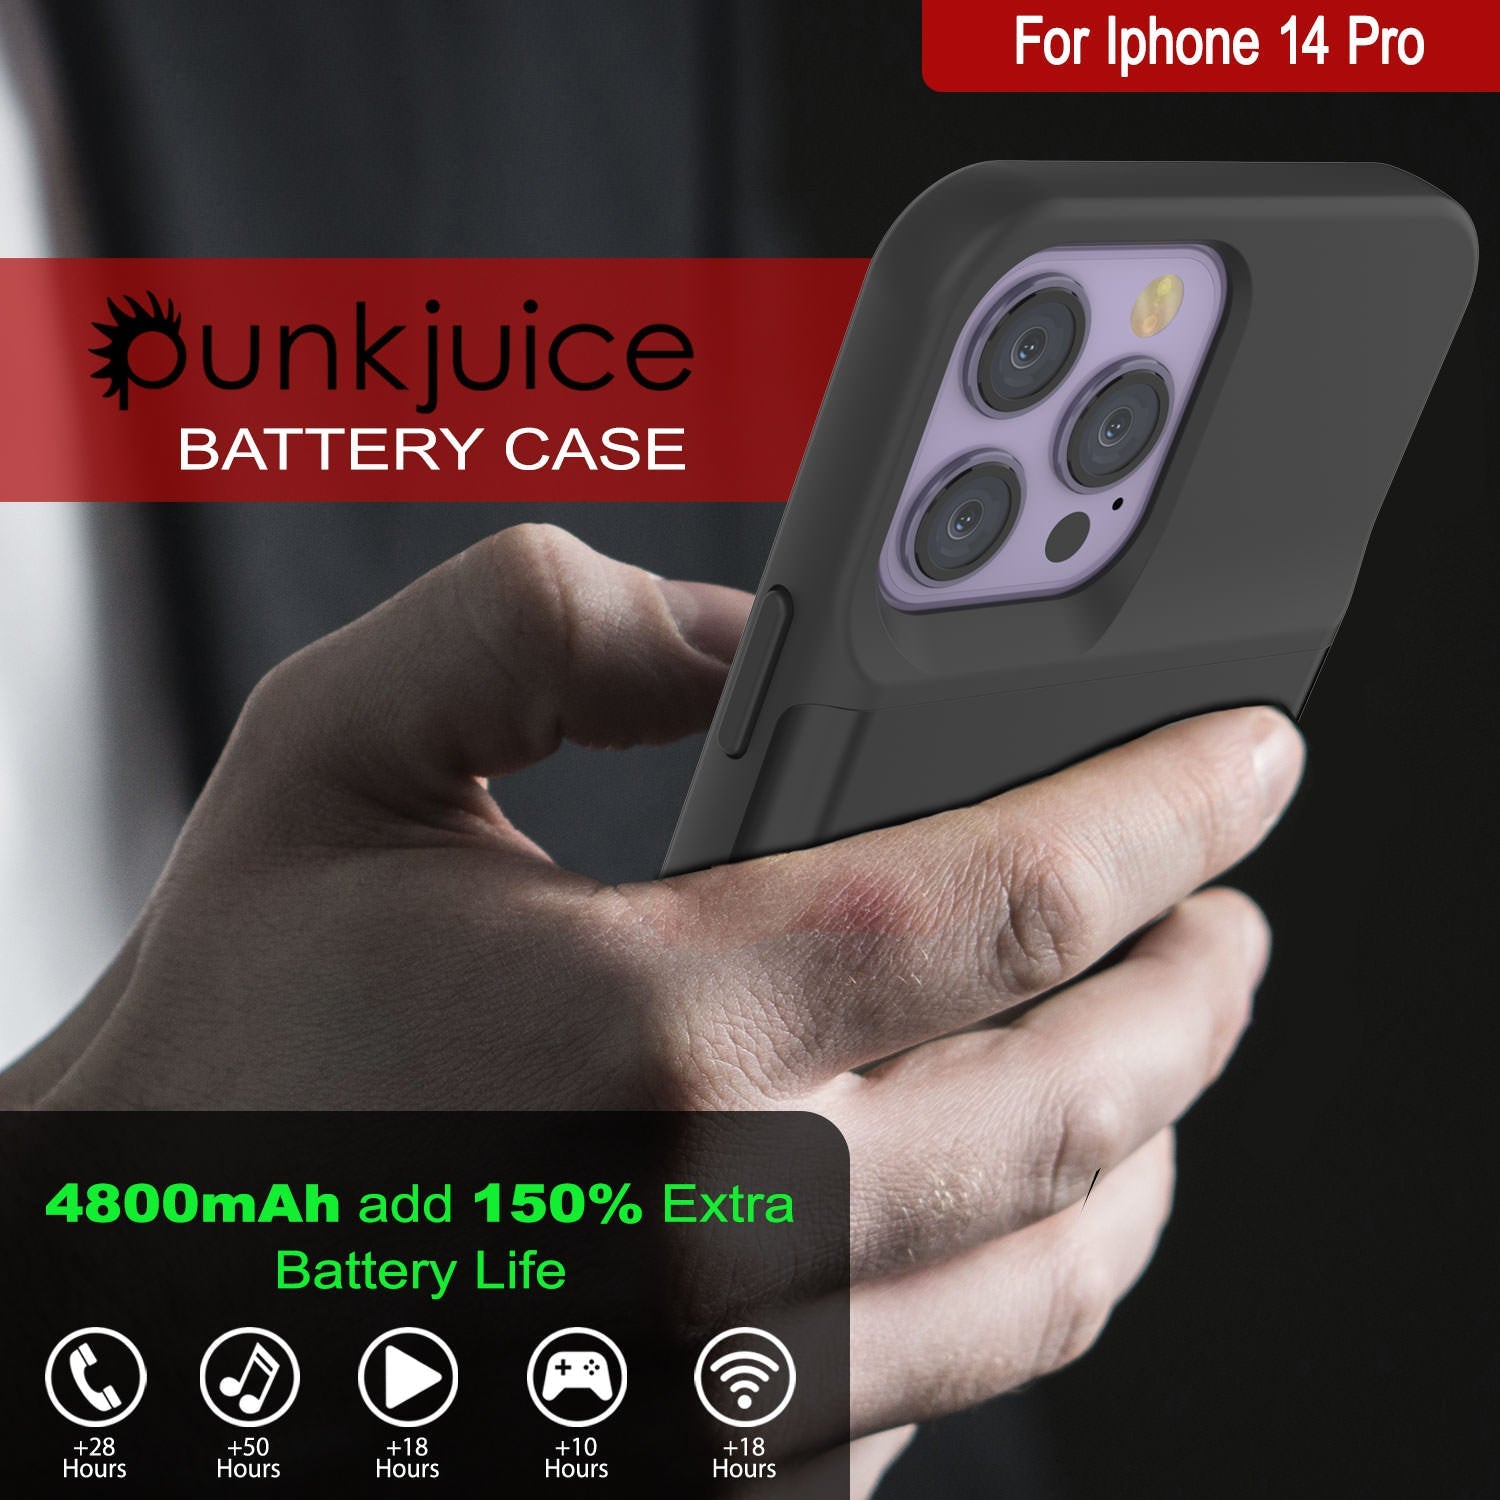 iPhone 14 Pro Battery Case, PunkJuice 4800mAH Fast Charging Power Bank W/ Screen Protector | [Black]